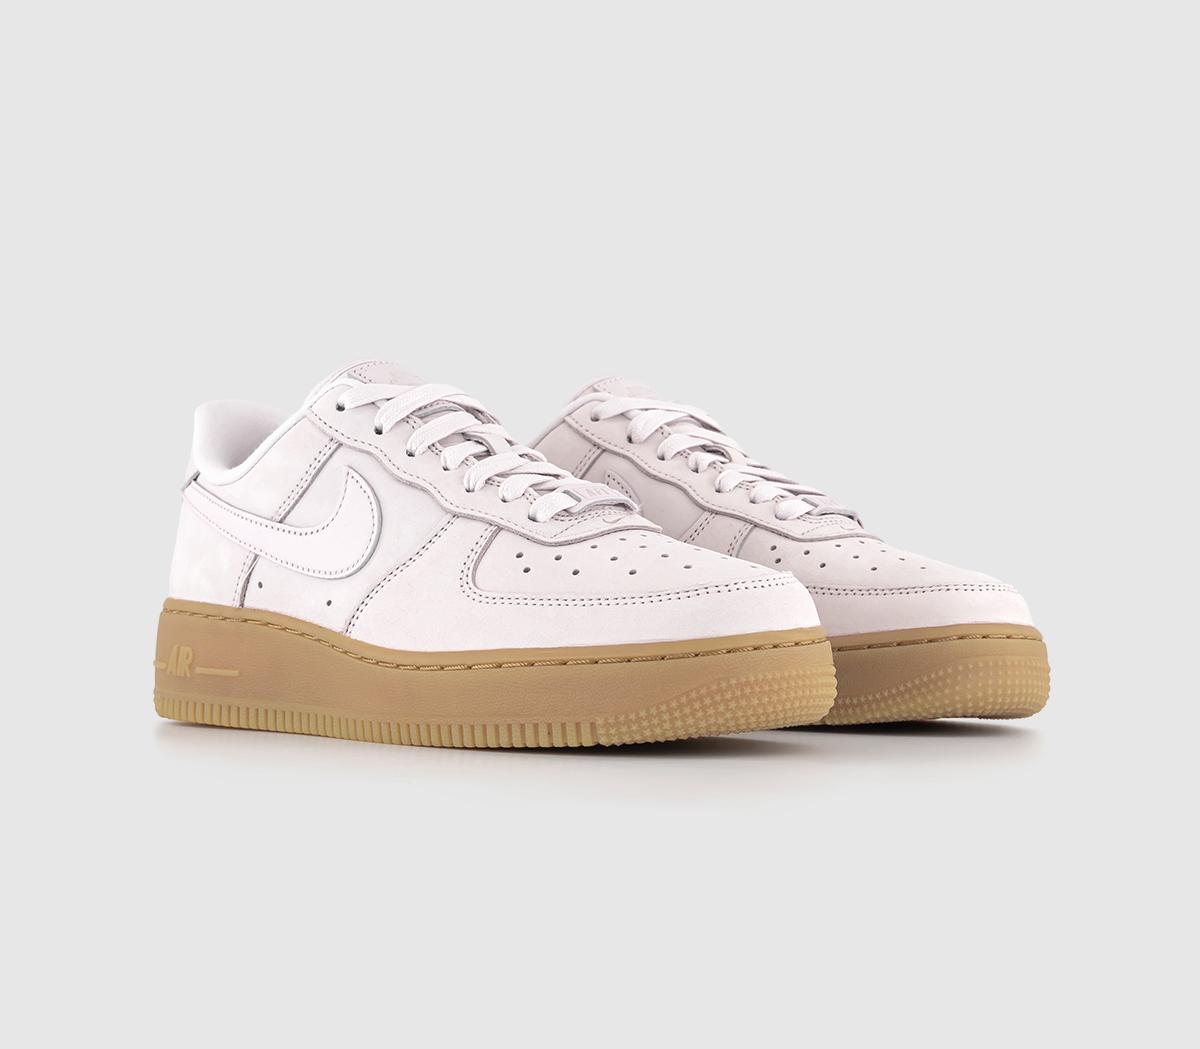 Nike Air Force 1 '07 Trainers Pearl Pink Gum Light Brown - Nike Air Force 1